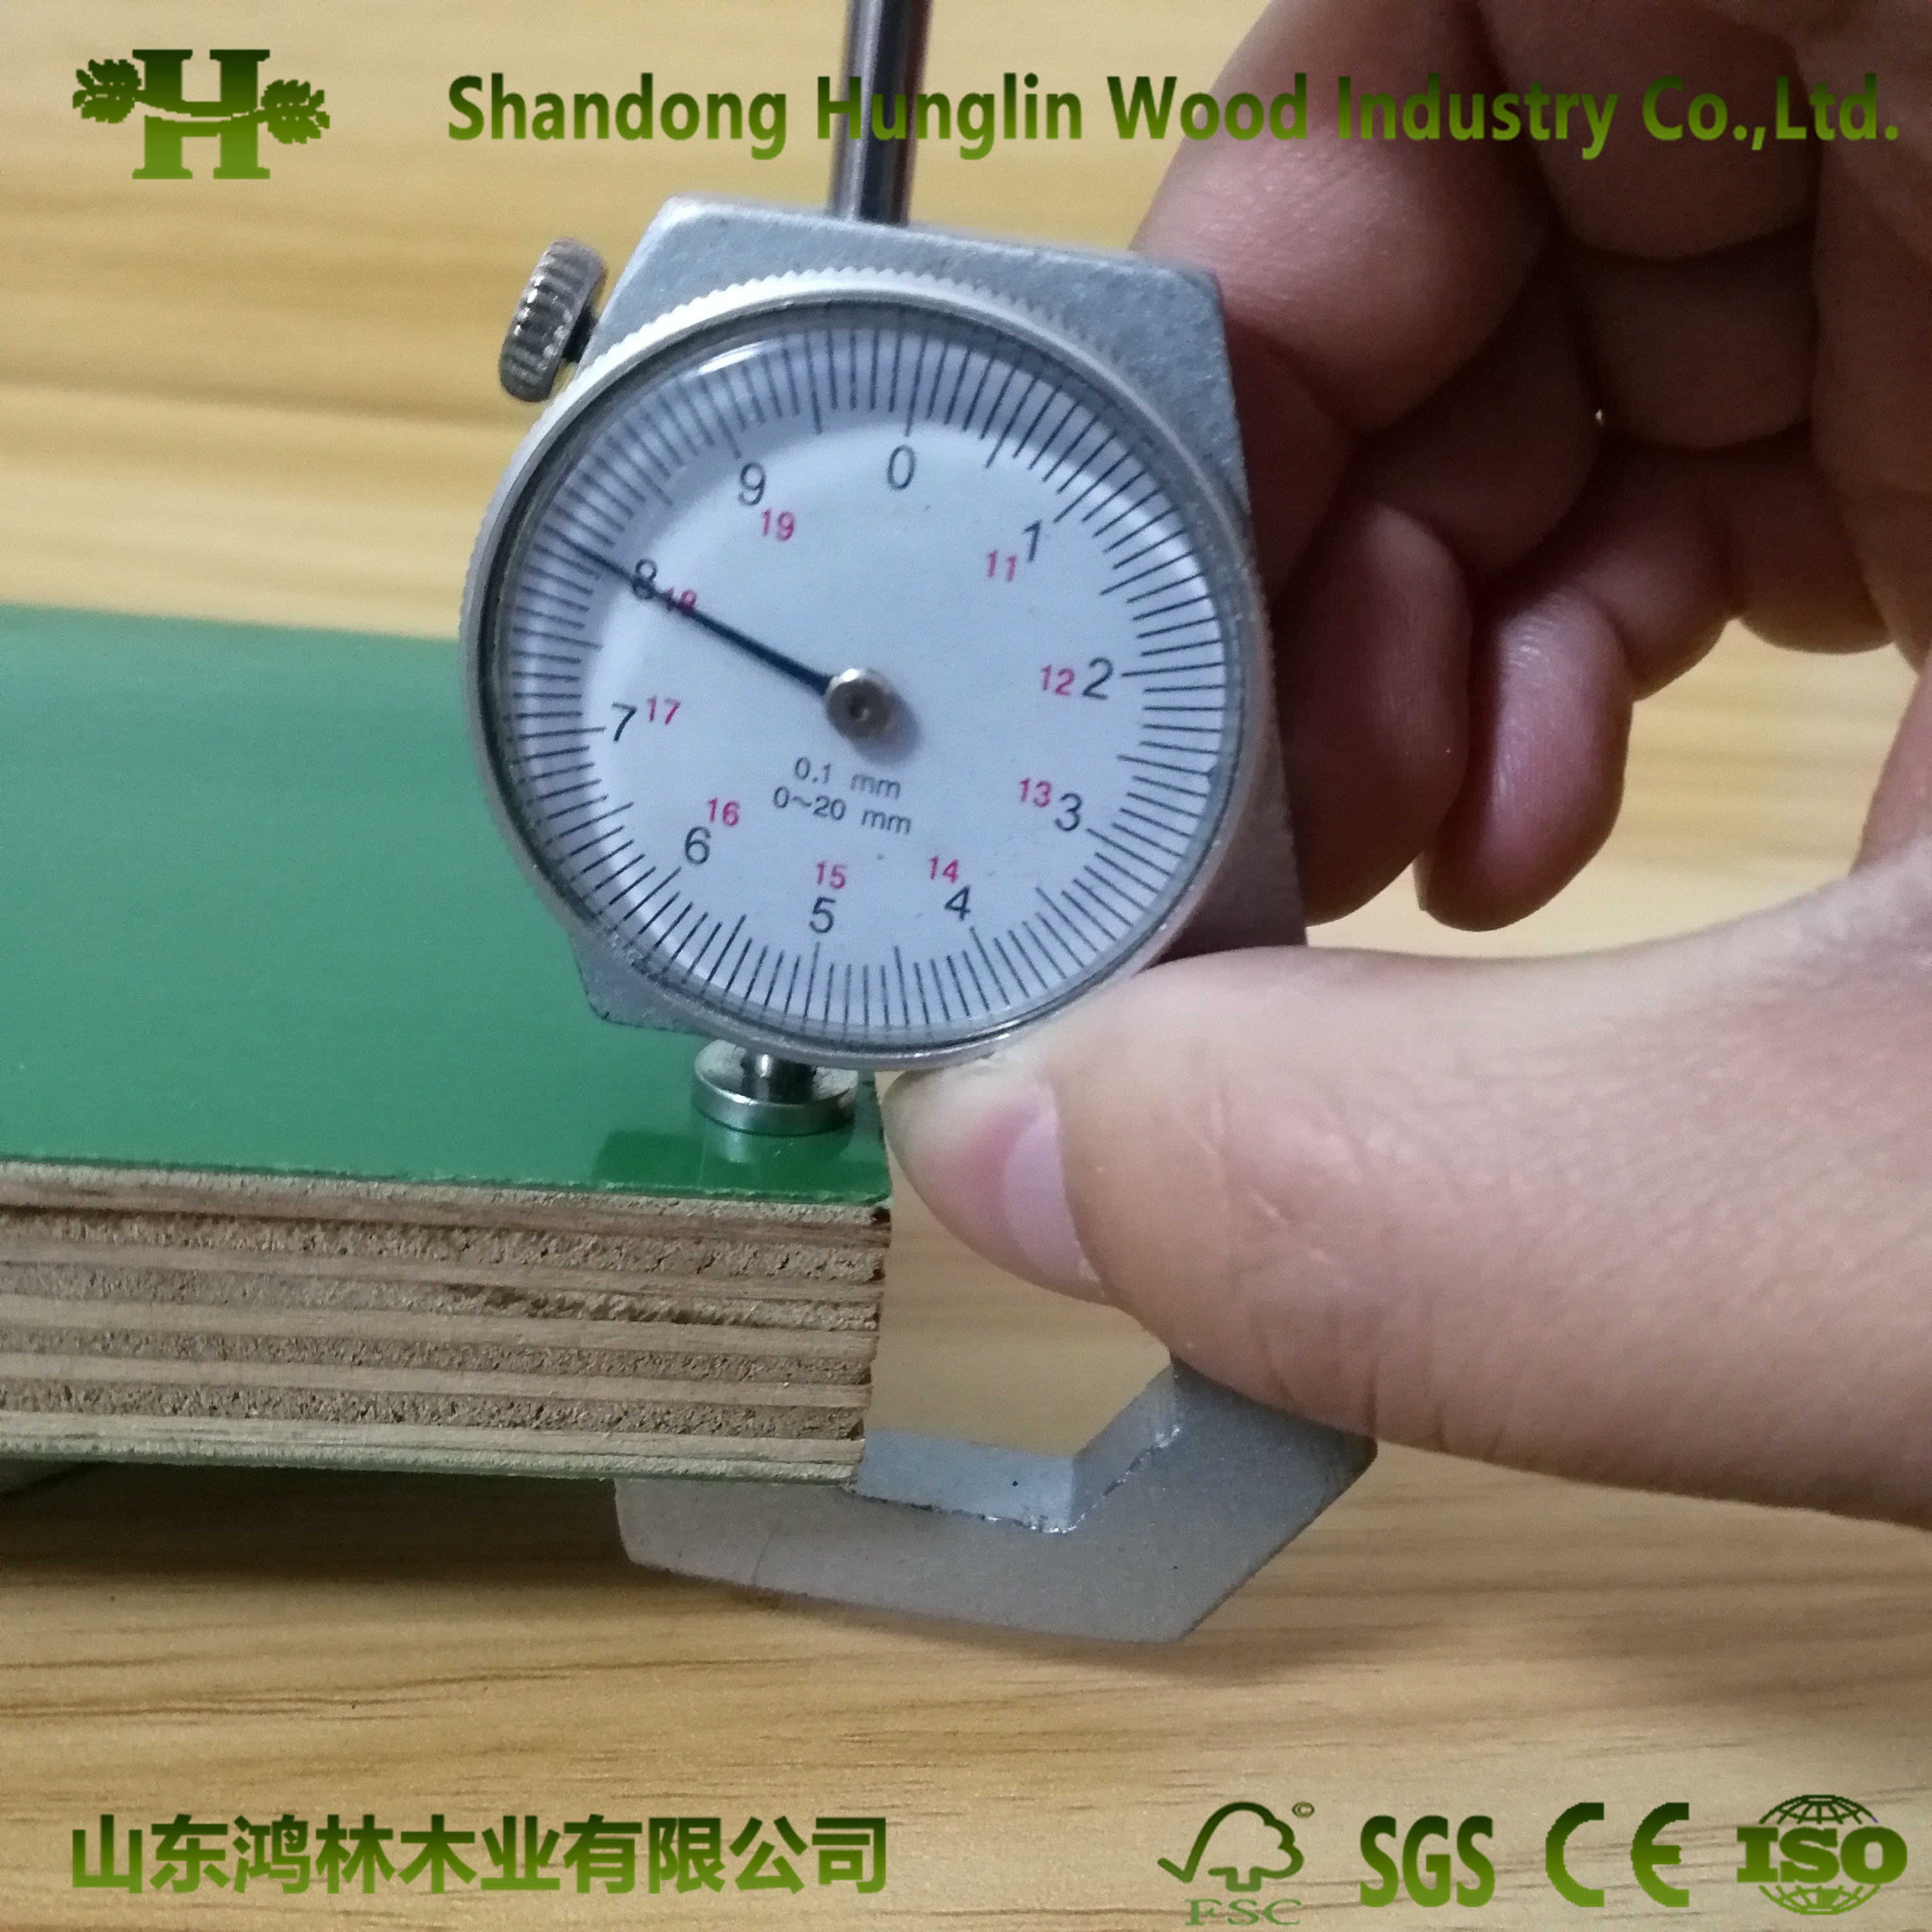 Reusable 30 Times PP/Plastic Coated Film Faced Plywood for Construction